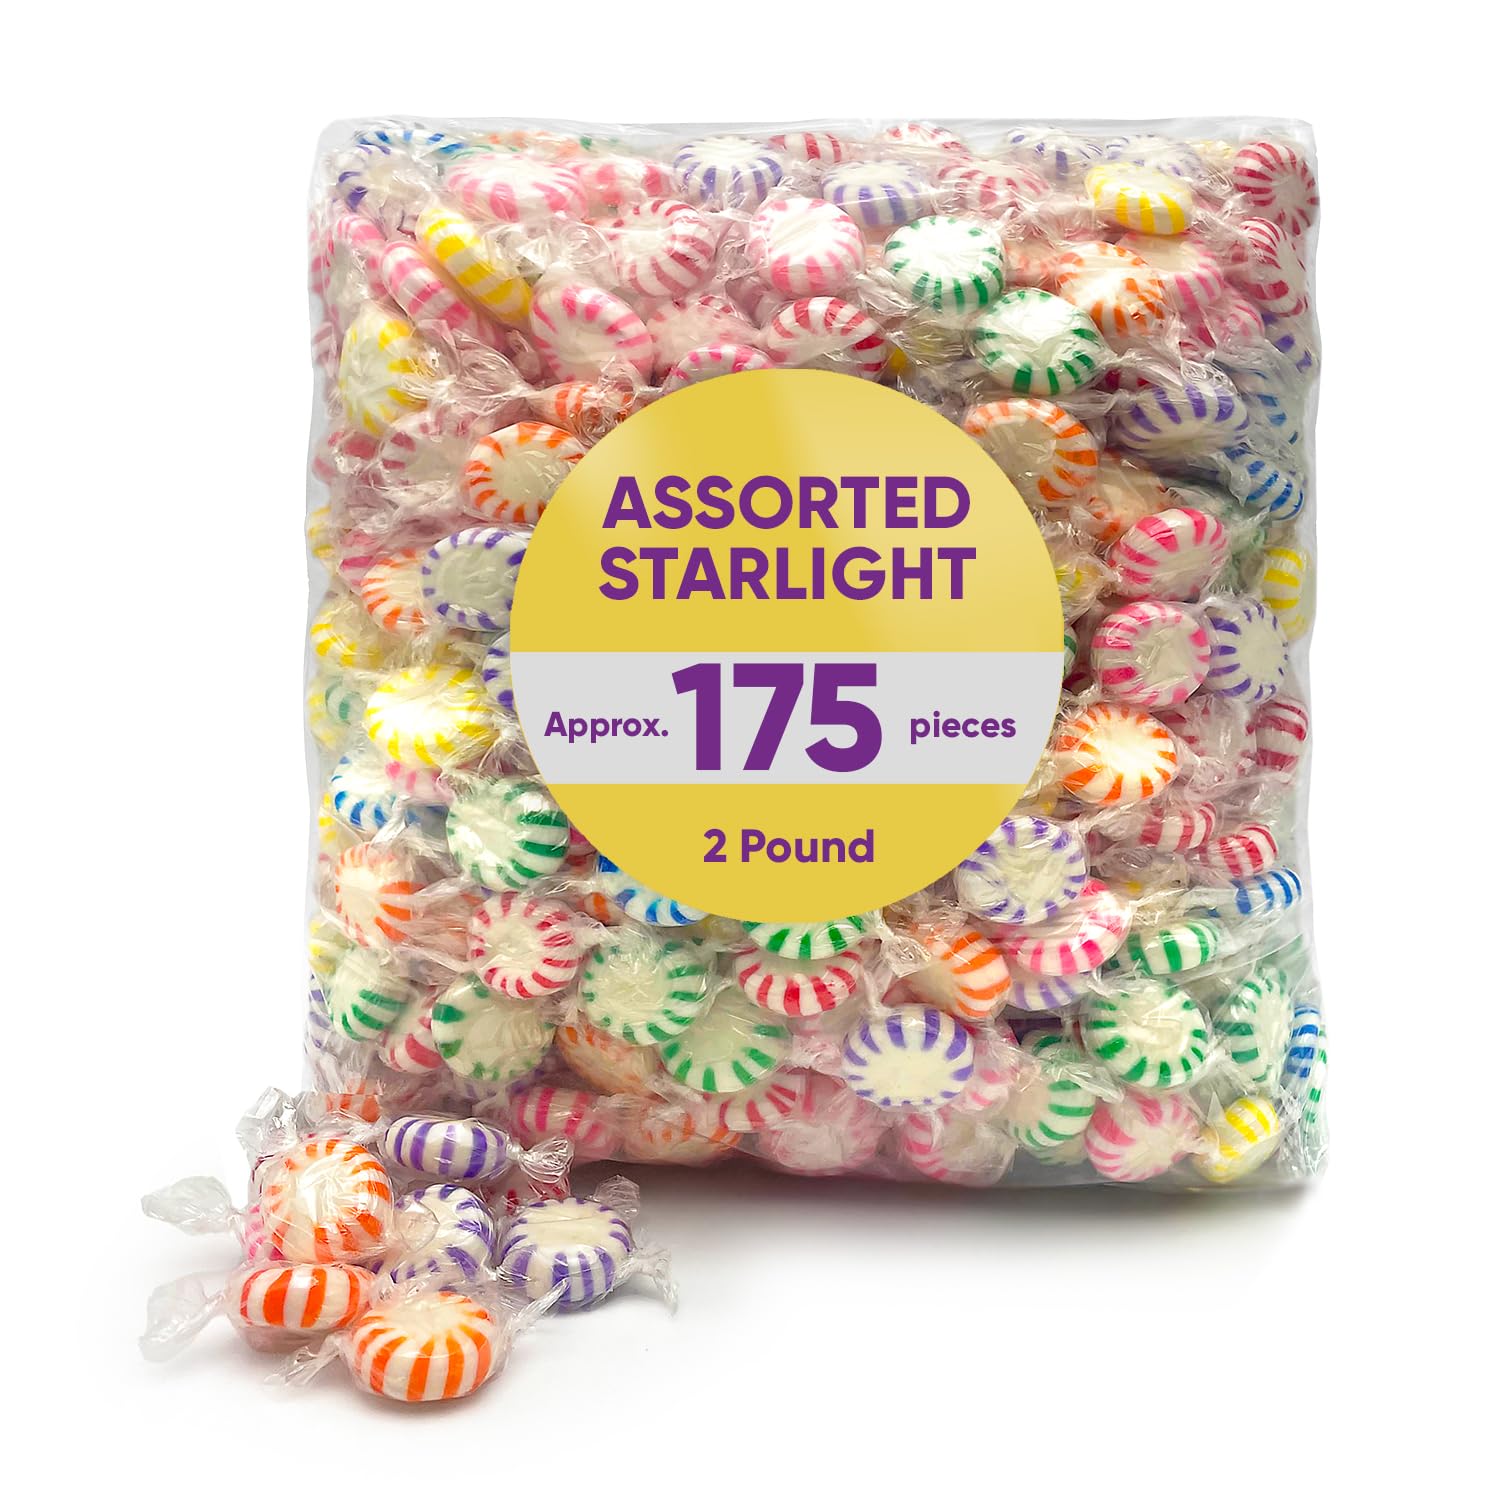 Mua Starlight Assorted Fruit Flavored Hard Candy 2 Pounds Of Approx 175 Bulk Fruit Flavored